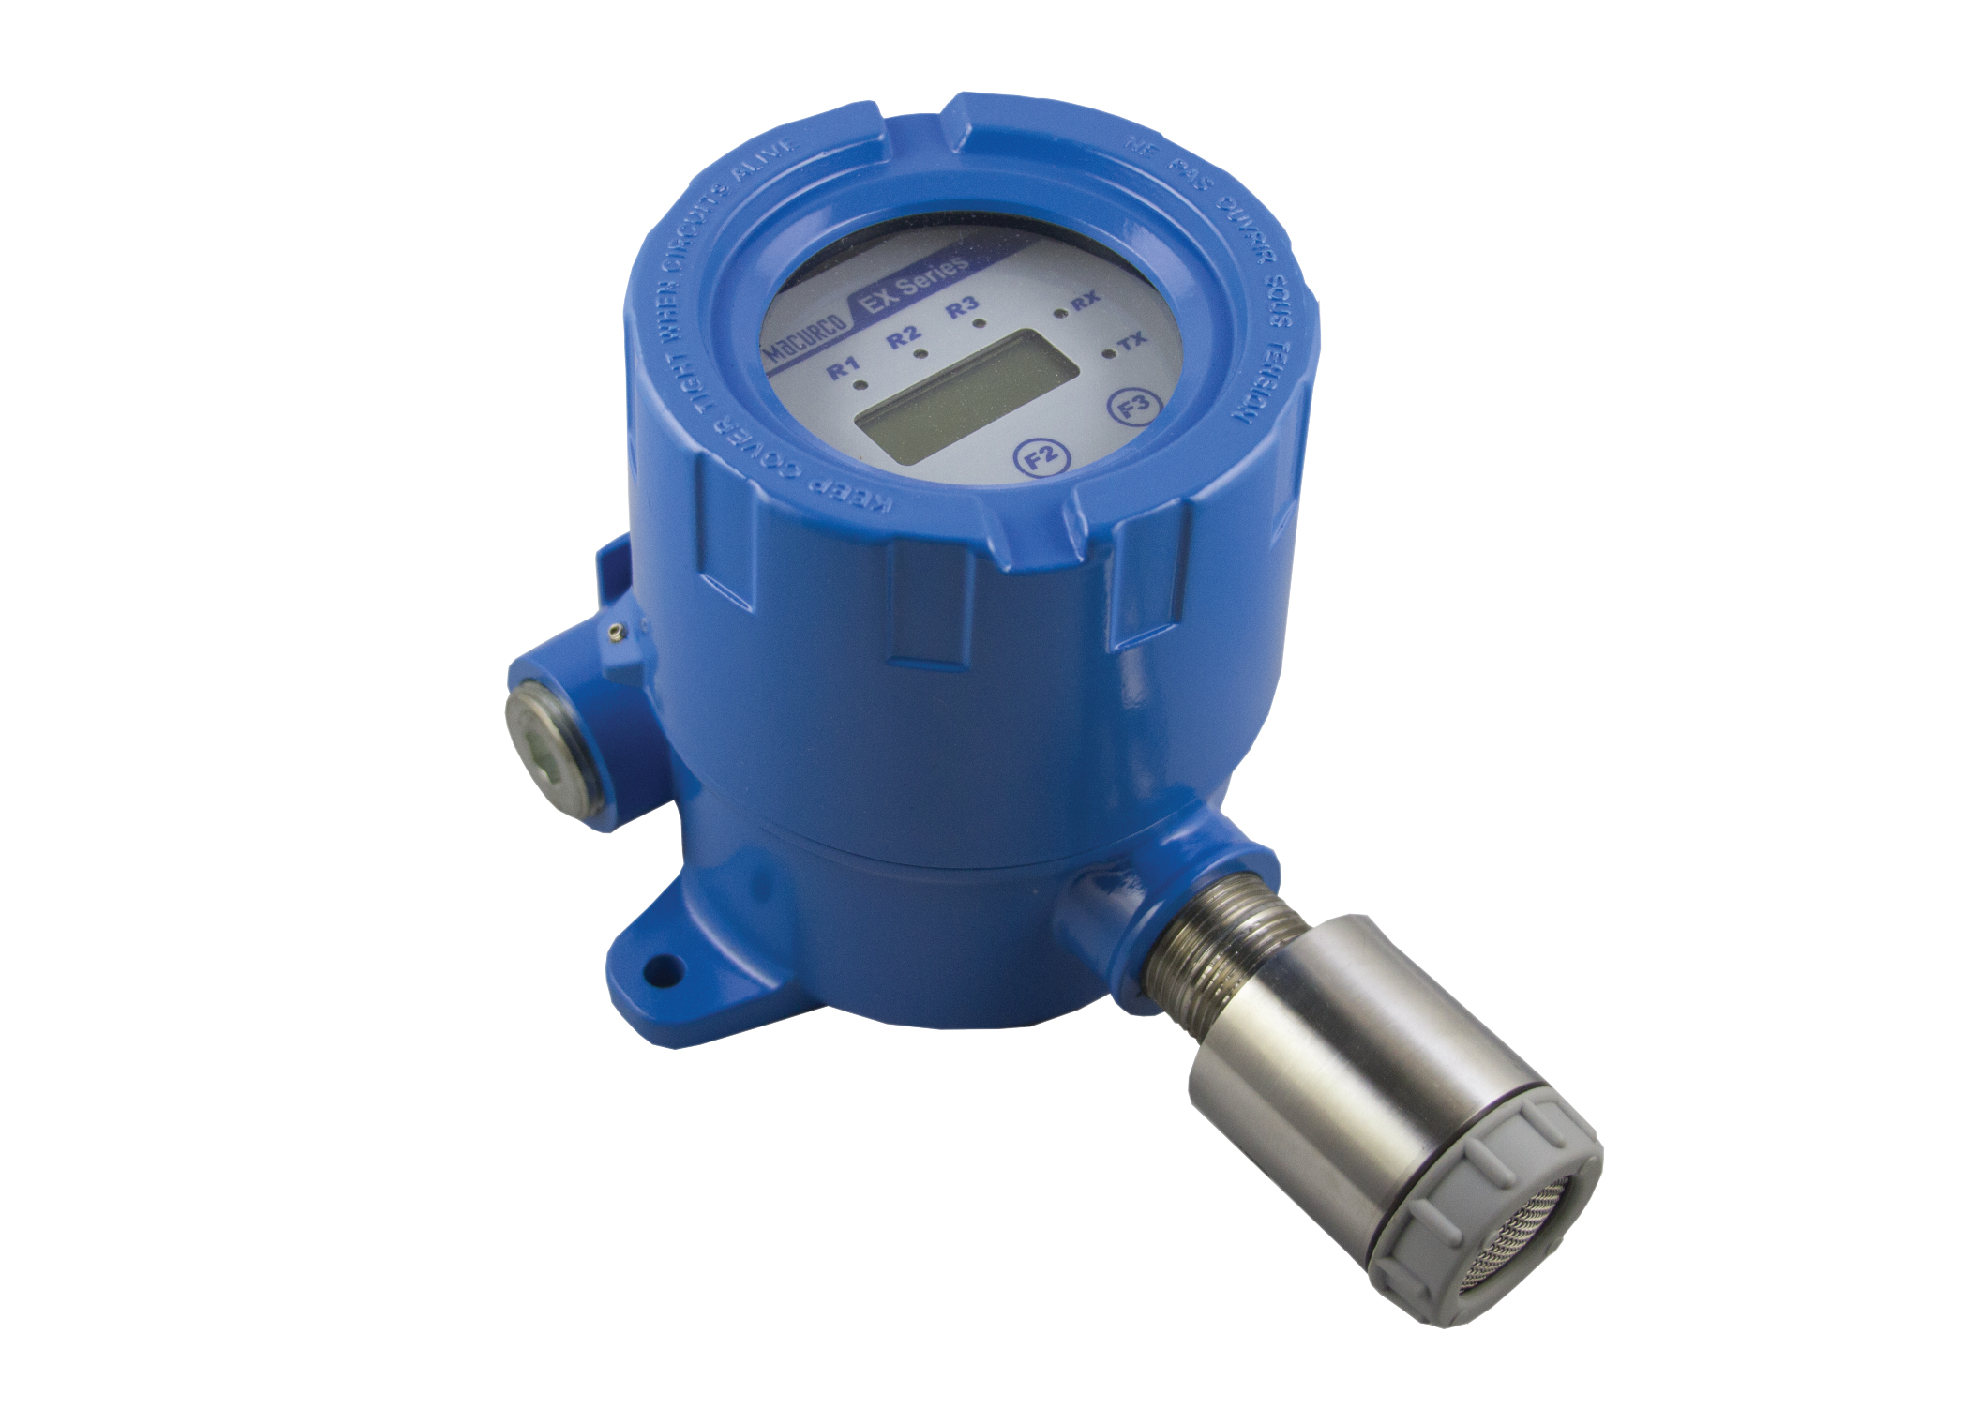 EX Series - Discontinued - Macurco Gas Detection